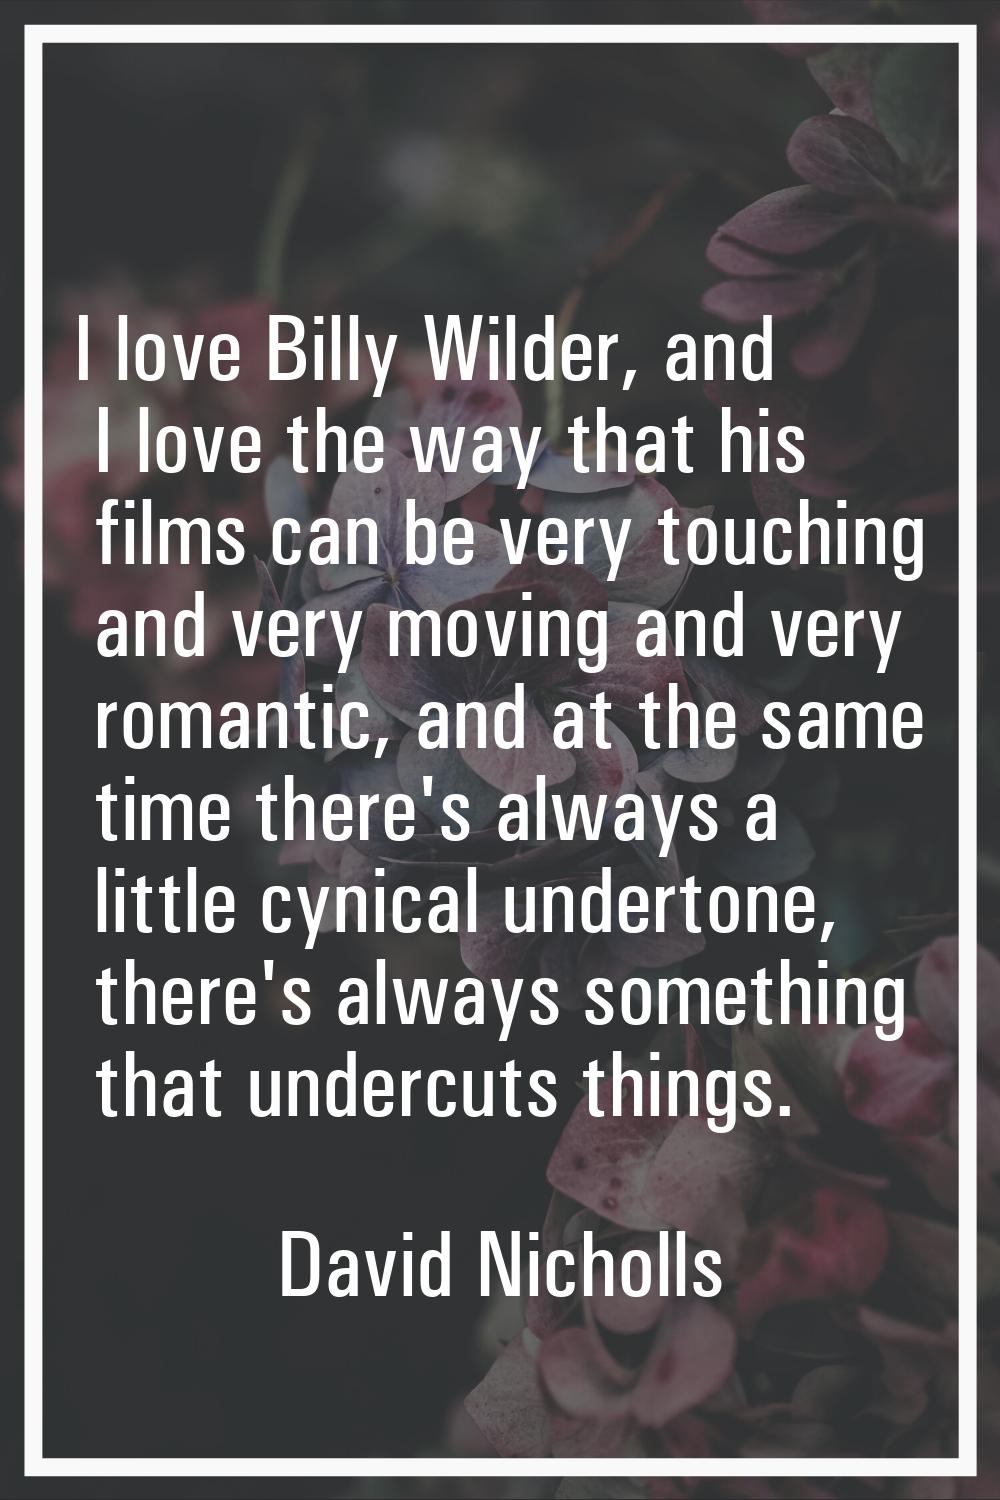 I love Billy Wilder, and I love the way that his films can be very touching and very moving and ver